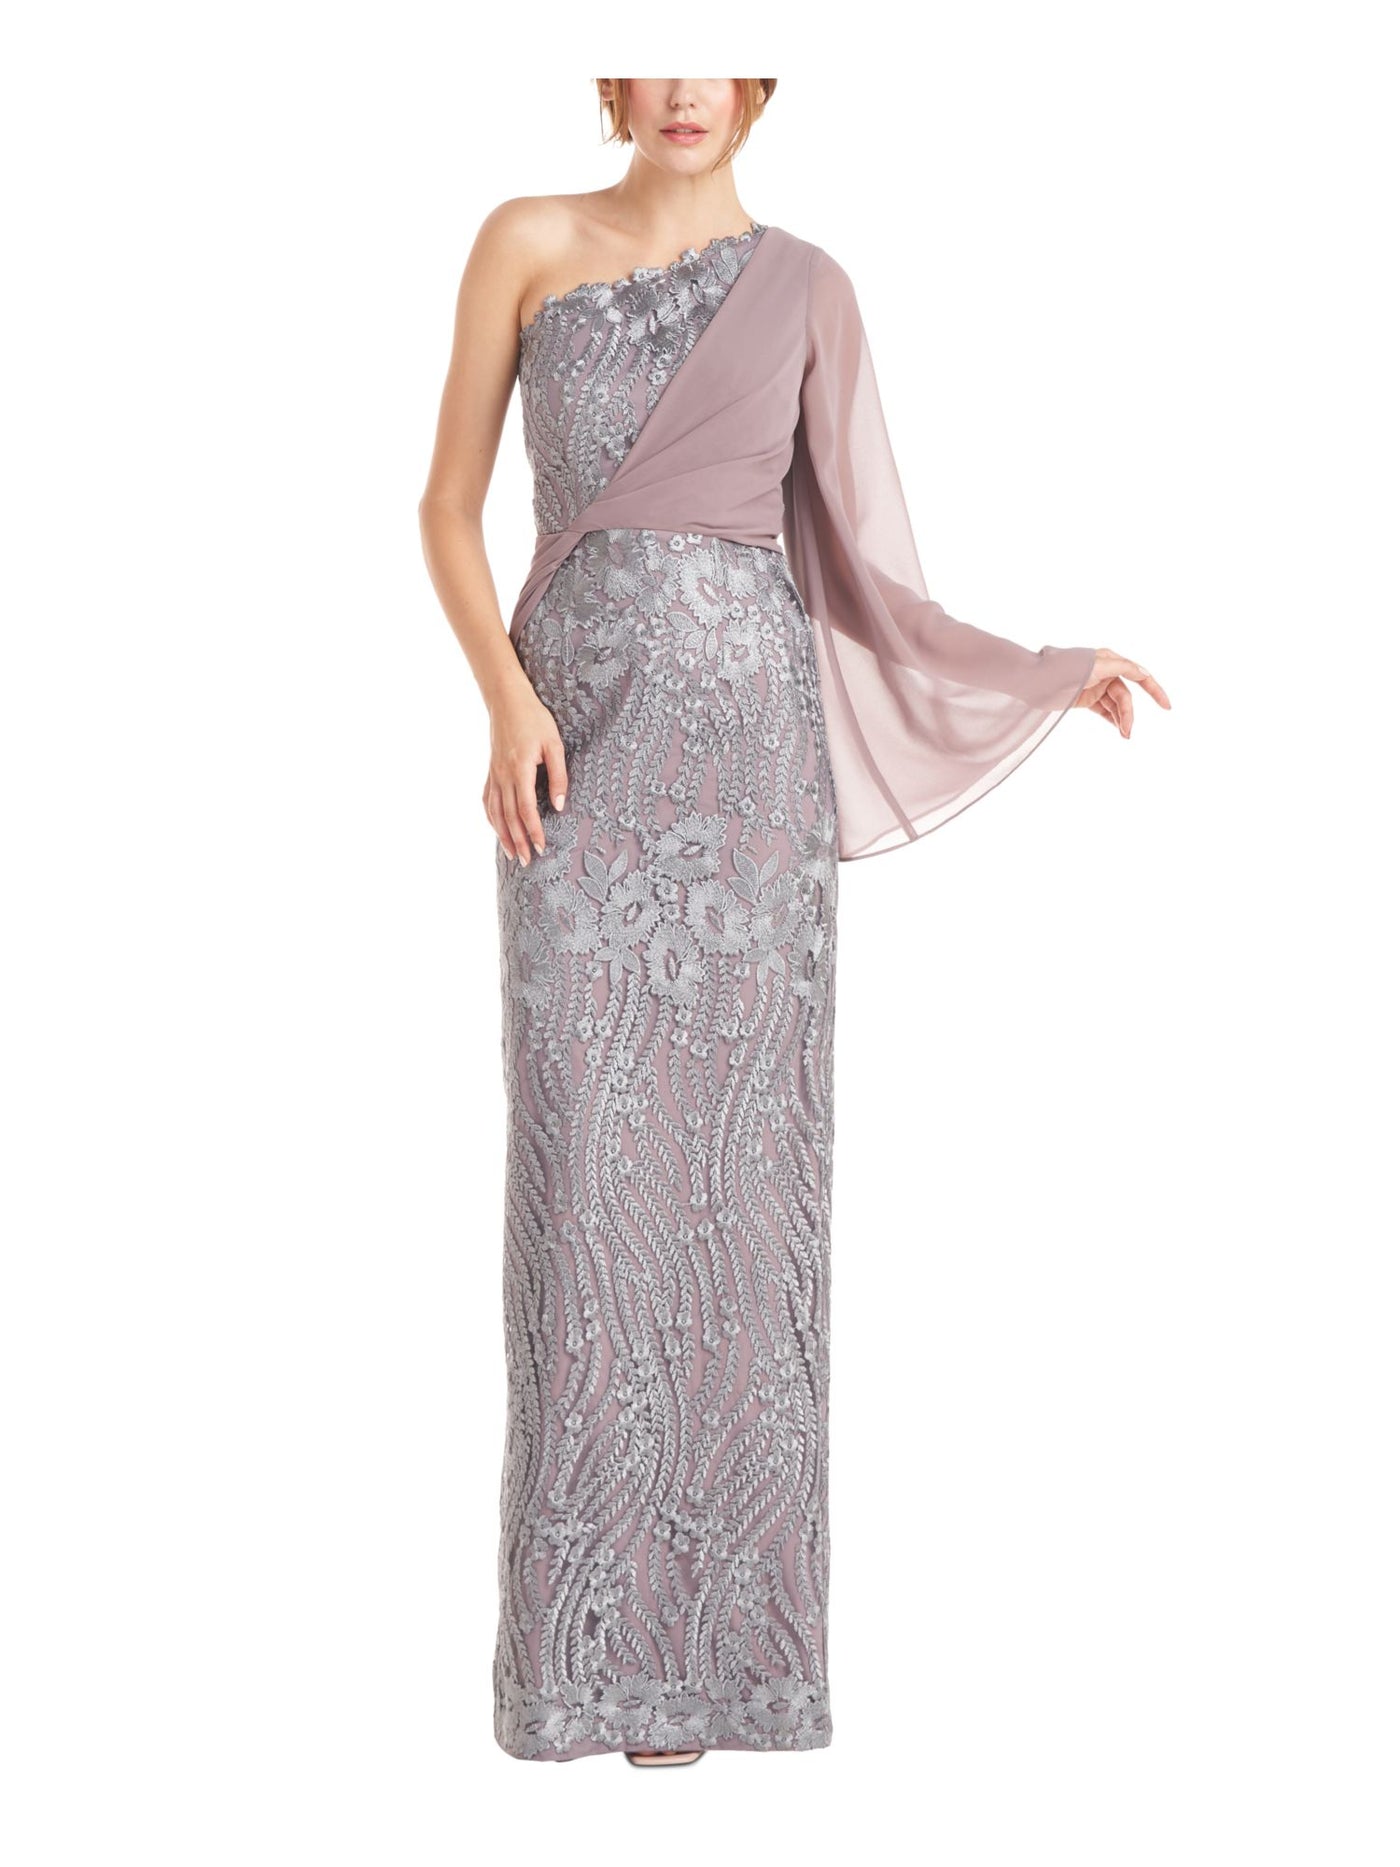 JS COLLECTIONS Womens Silver Embroidered Zippered Overlay Lined Floral Long Sleeve Asymmetrical Neckline Full-Length Evening Gown Dress 8